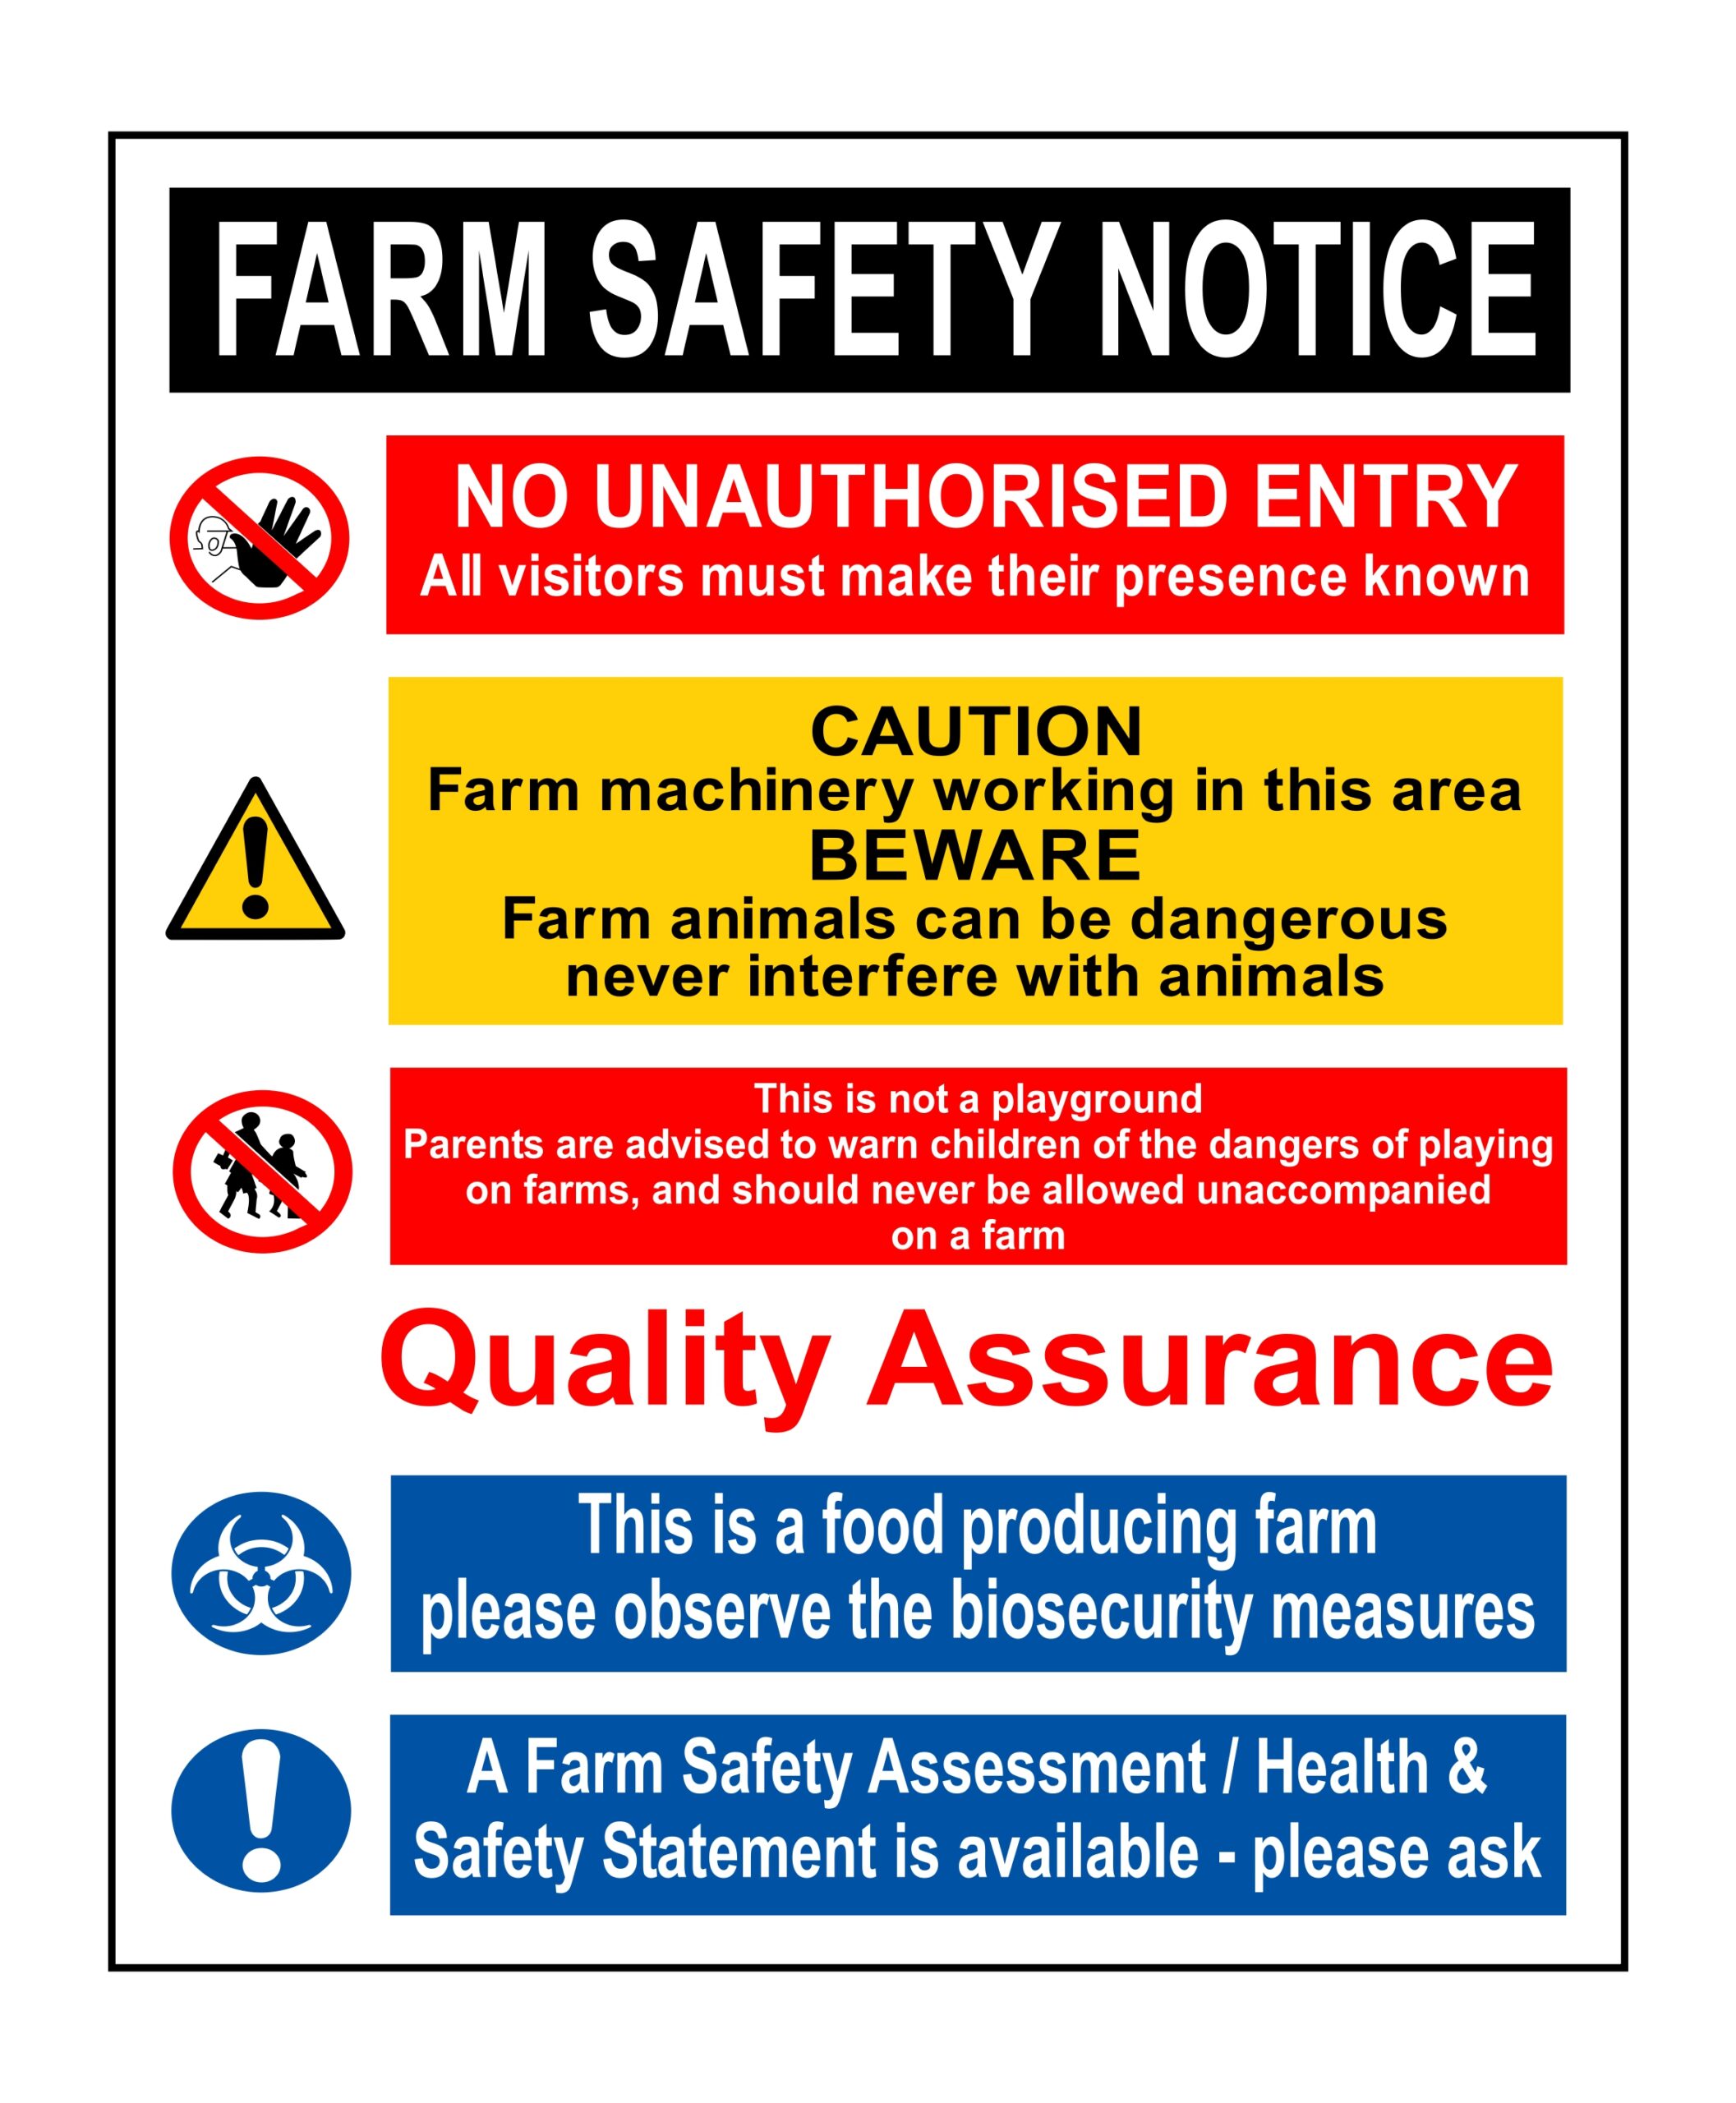 Farm Safety and Quality Assurance notice